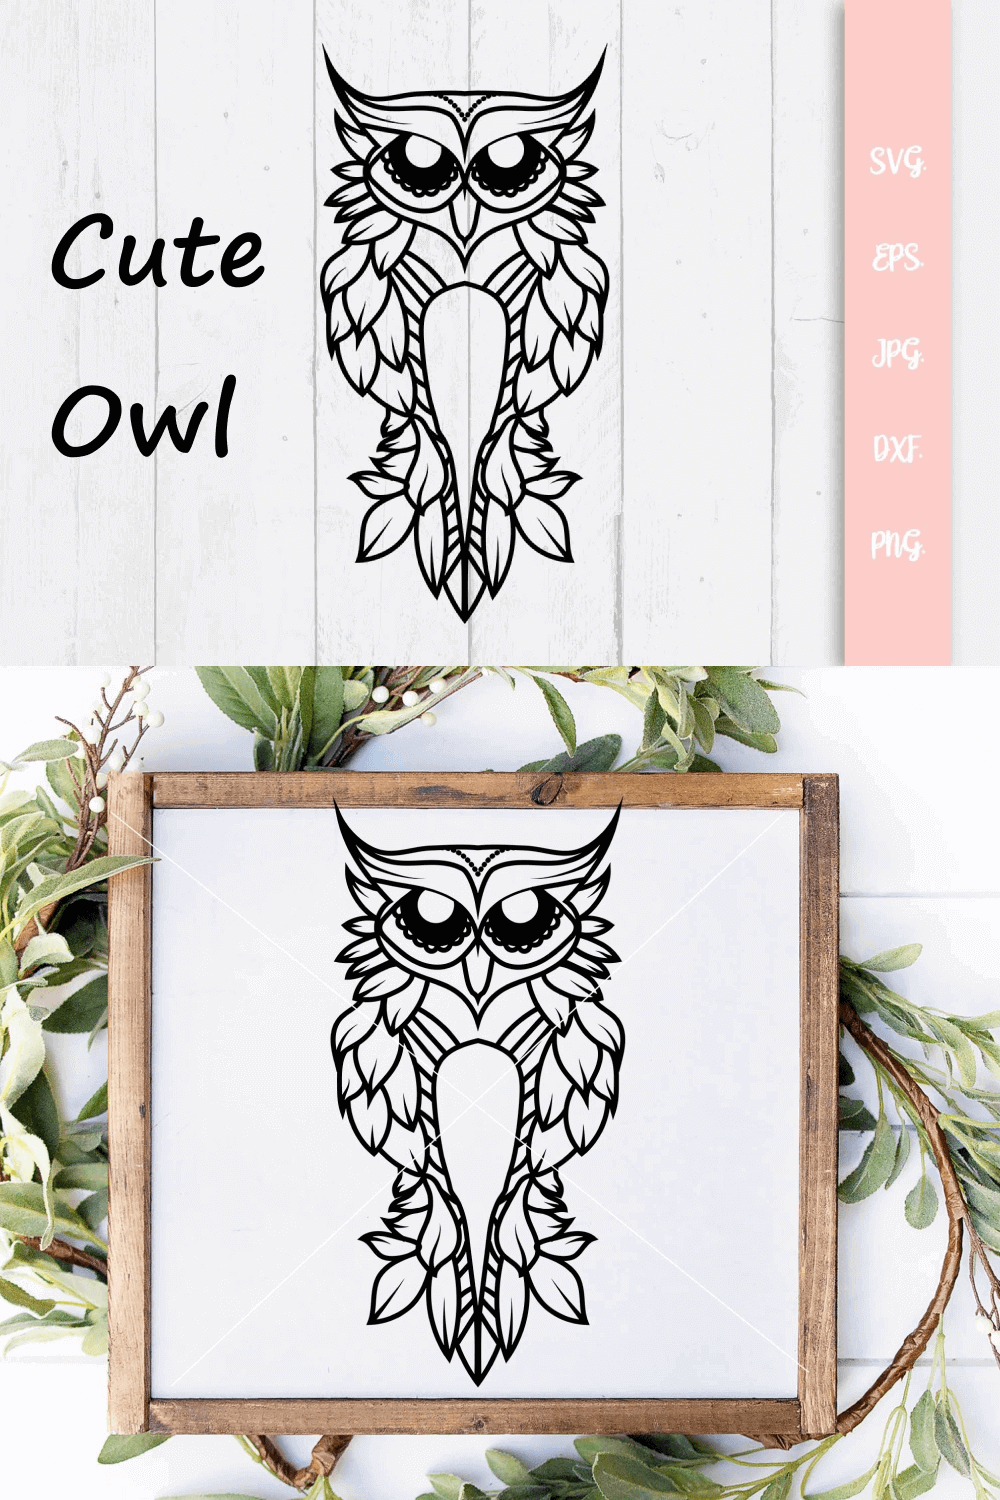 Two Cute Owls on the Different Background.